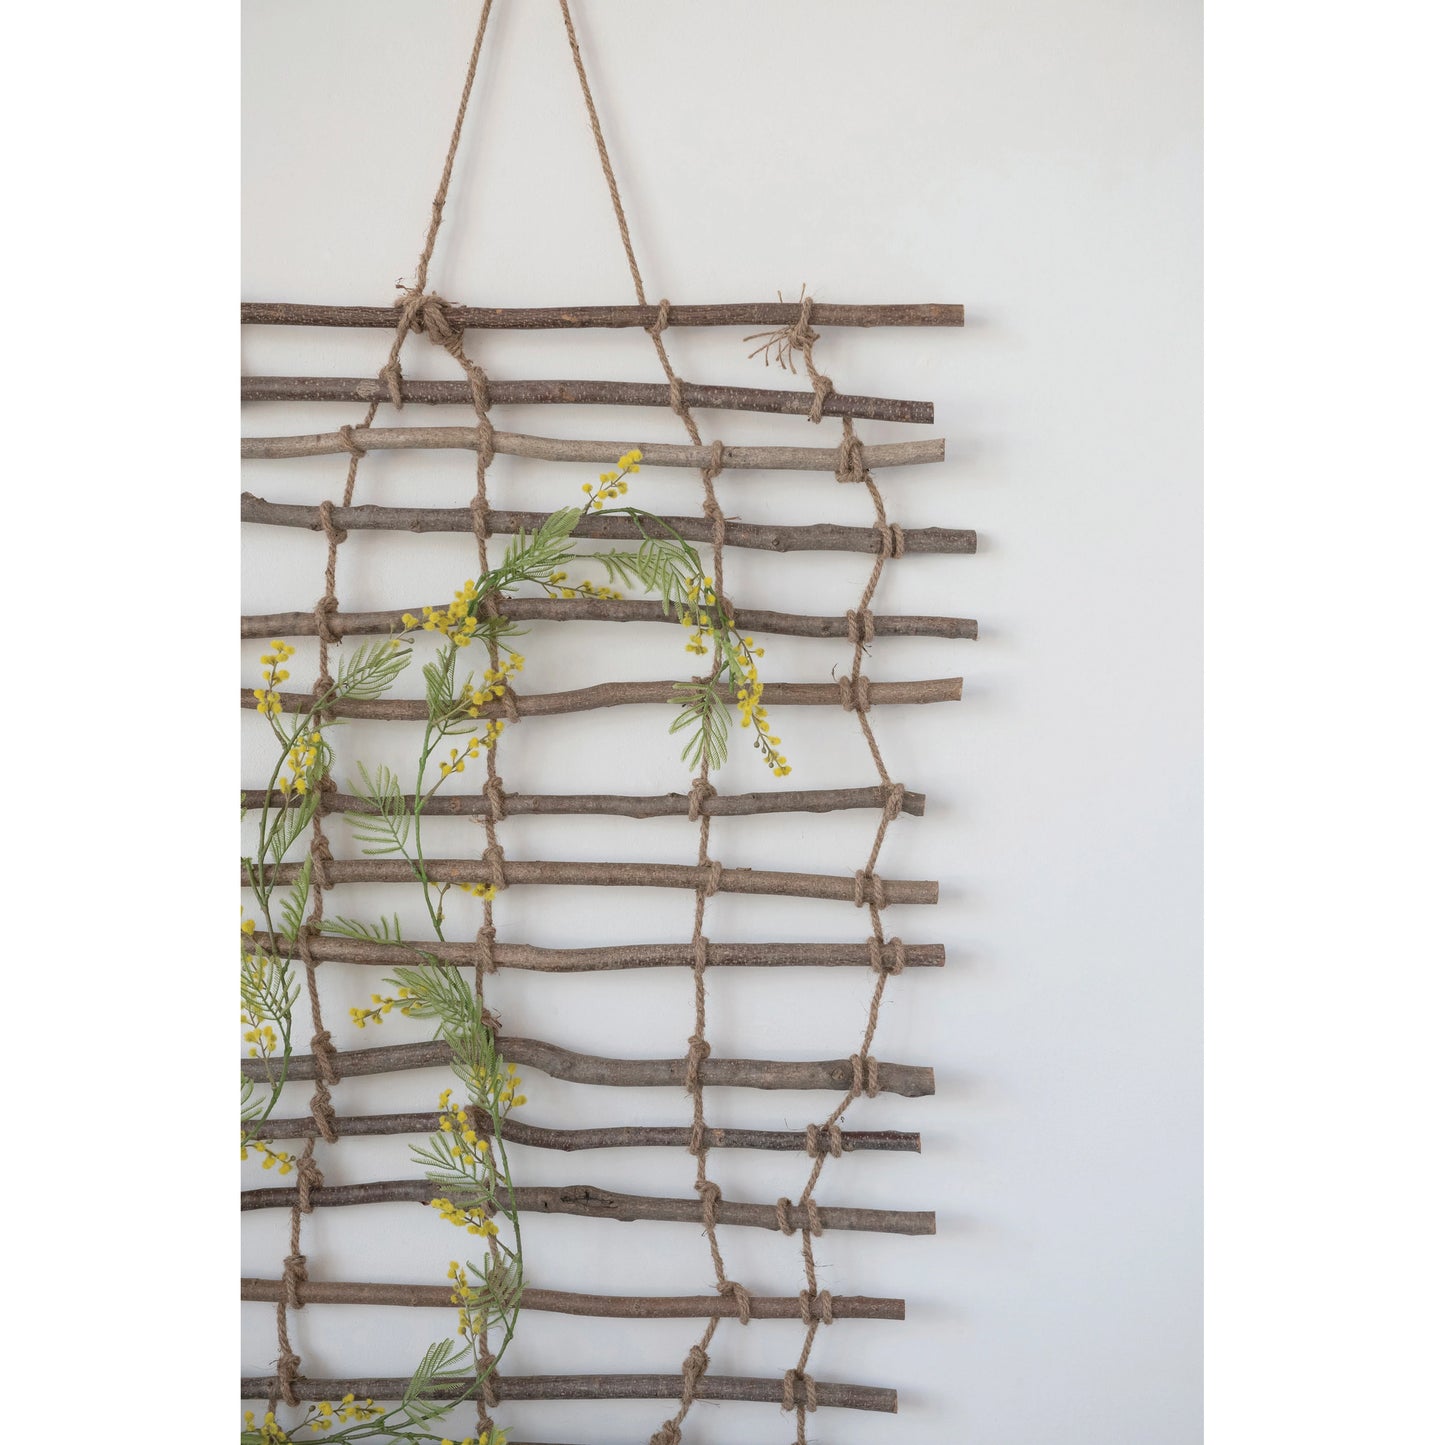 close up view of the wood and jute wall trellis with a vine growing on it against a white wall